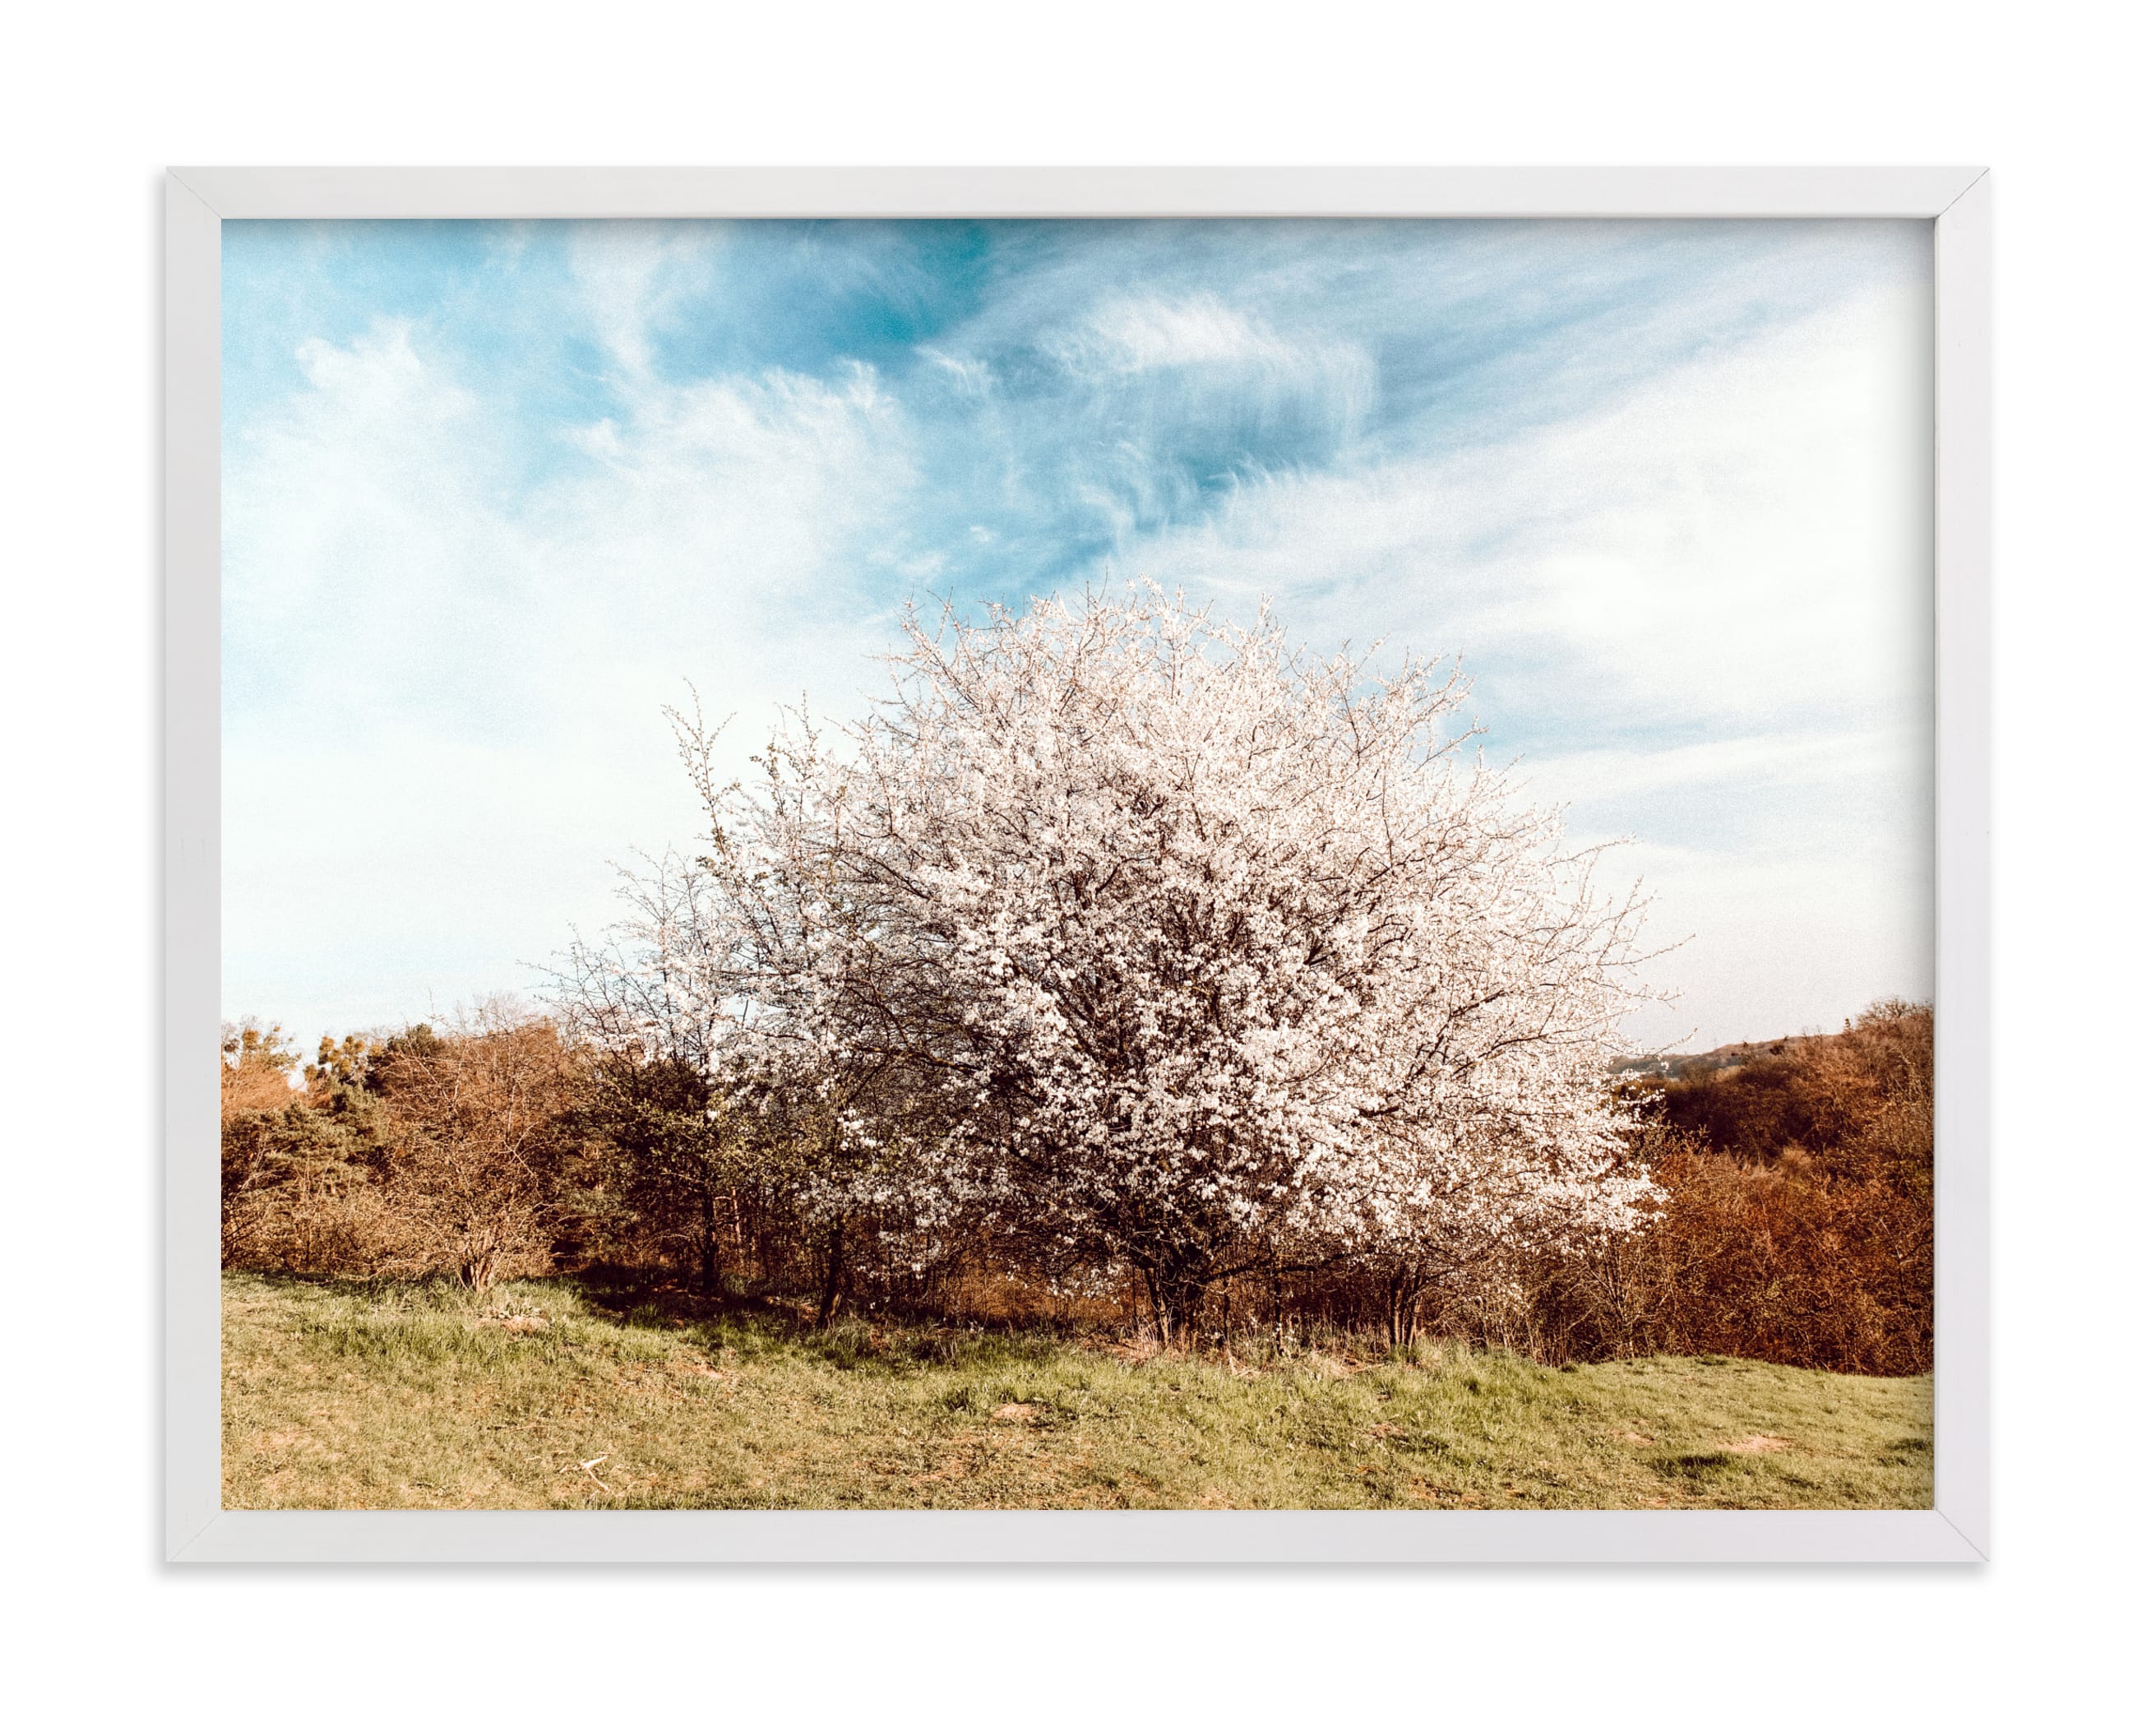 "Blooming tree" by Lying on the grass in beautiful frame options and a variety of sizes.